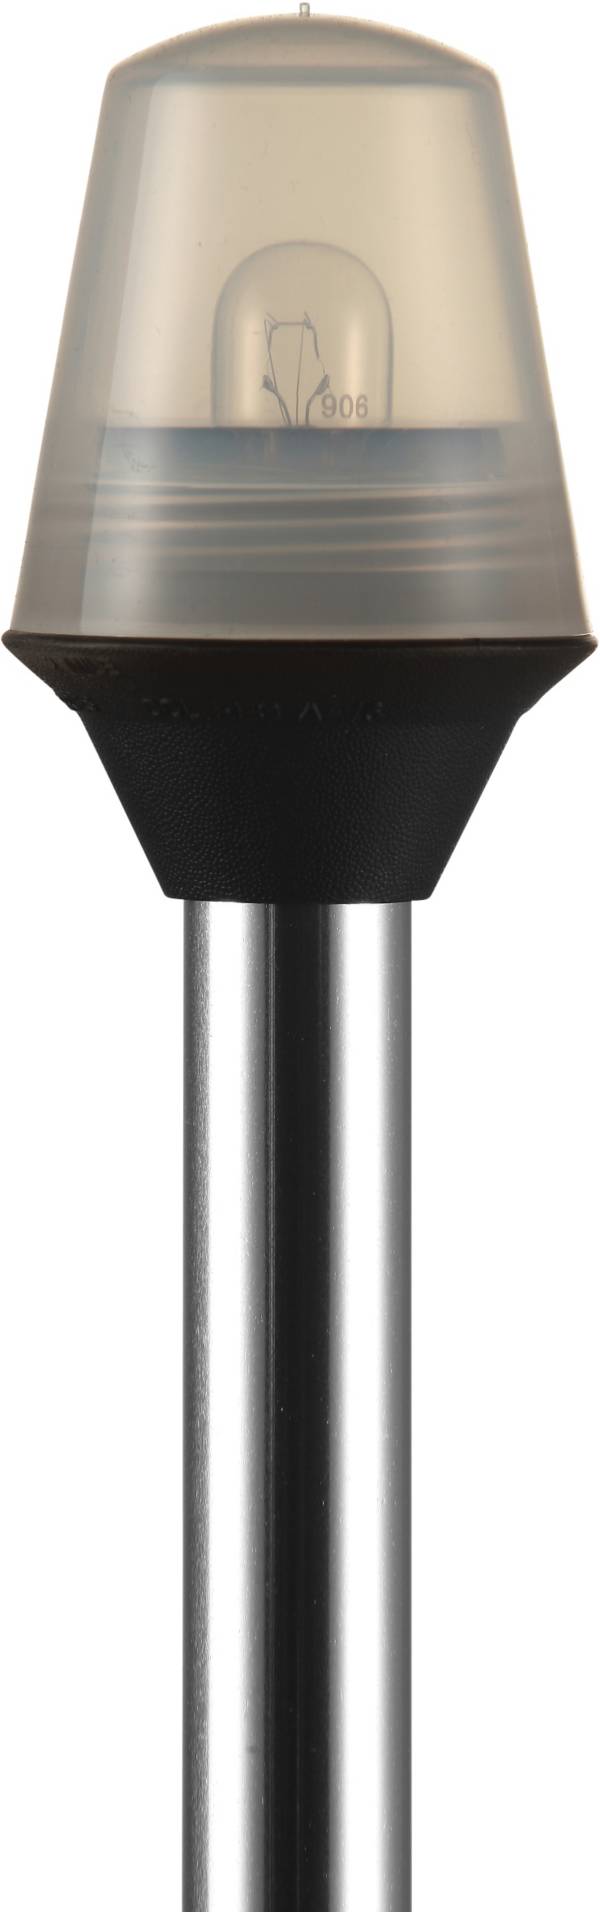 Attwood Frosted Globe All-Around Pole Light product image